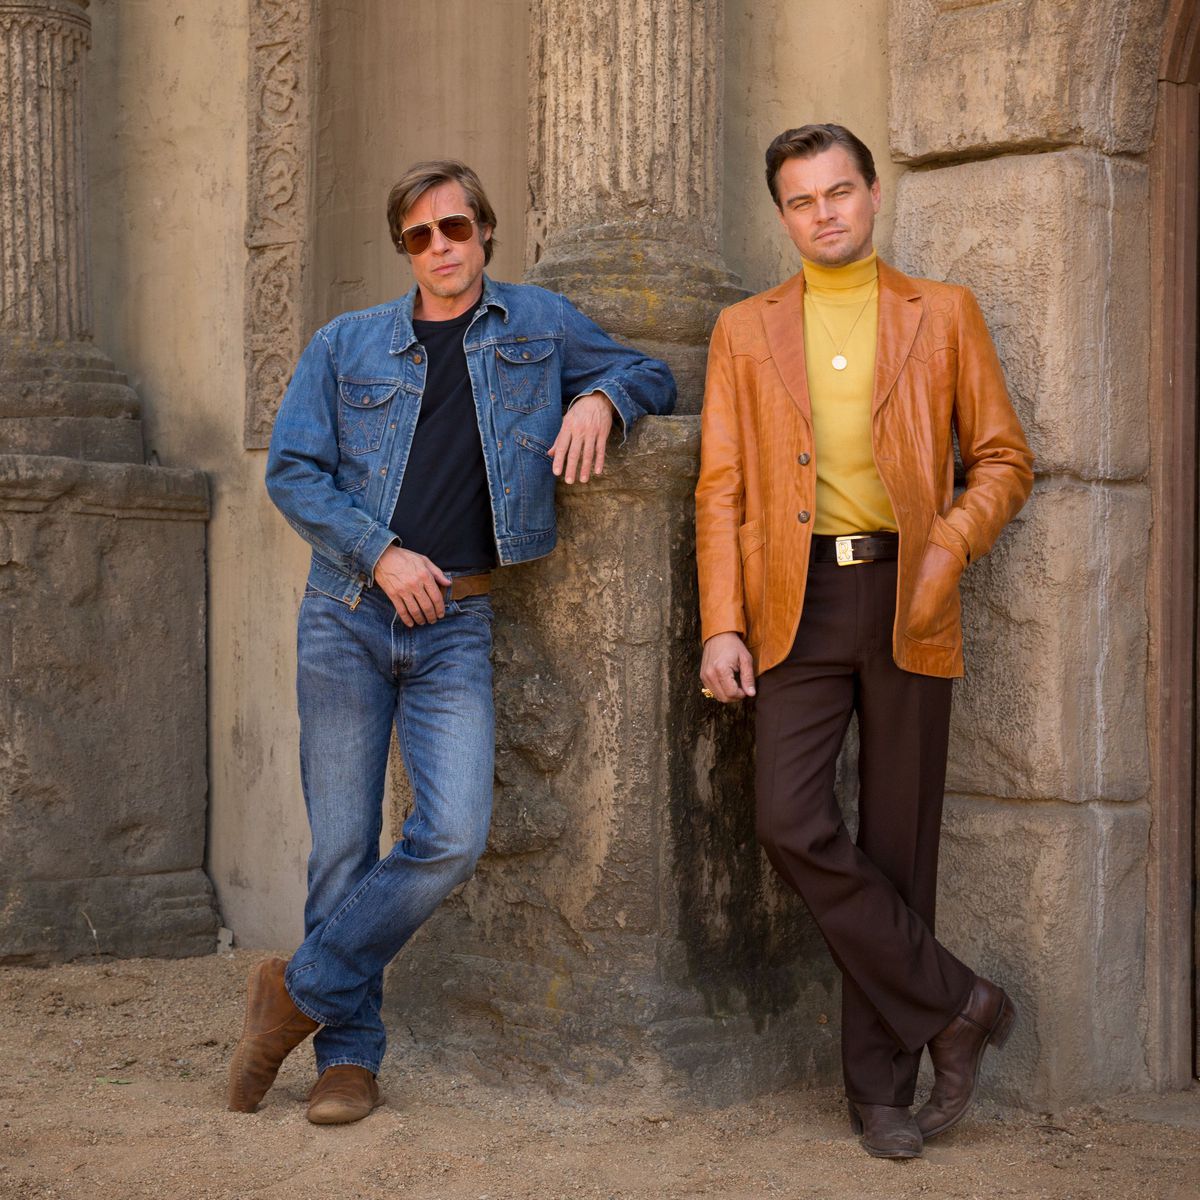 Cliff and Rick pose against a wall.